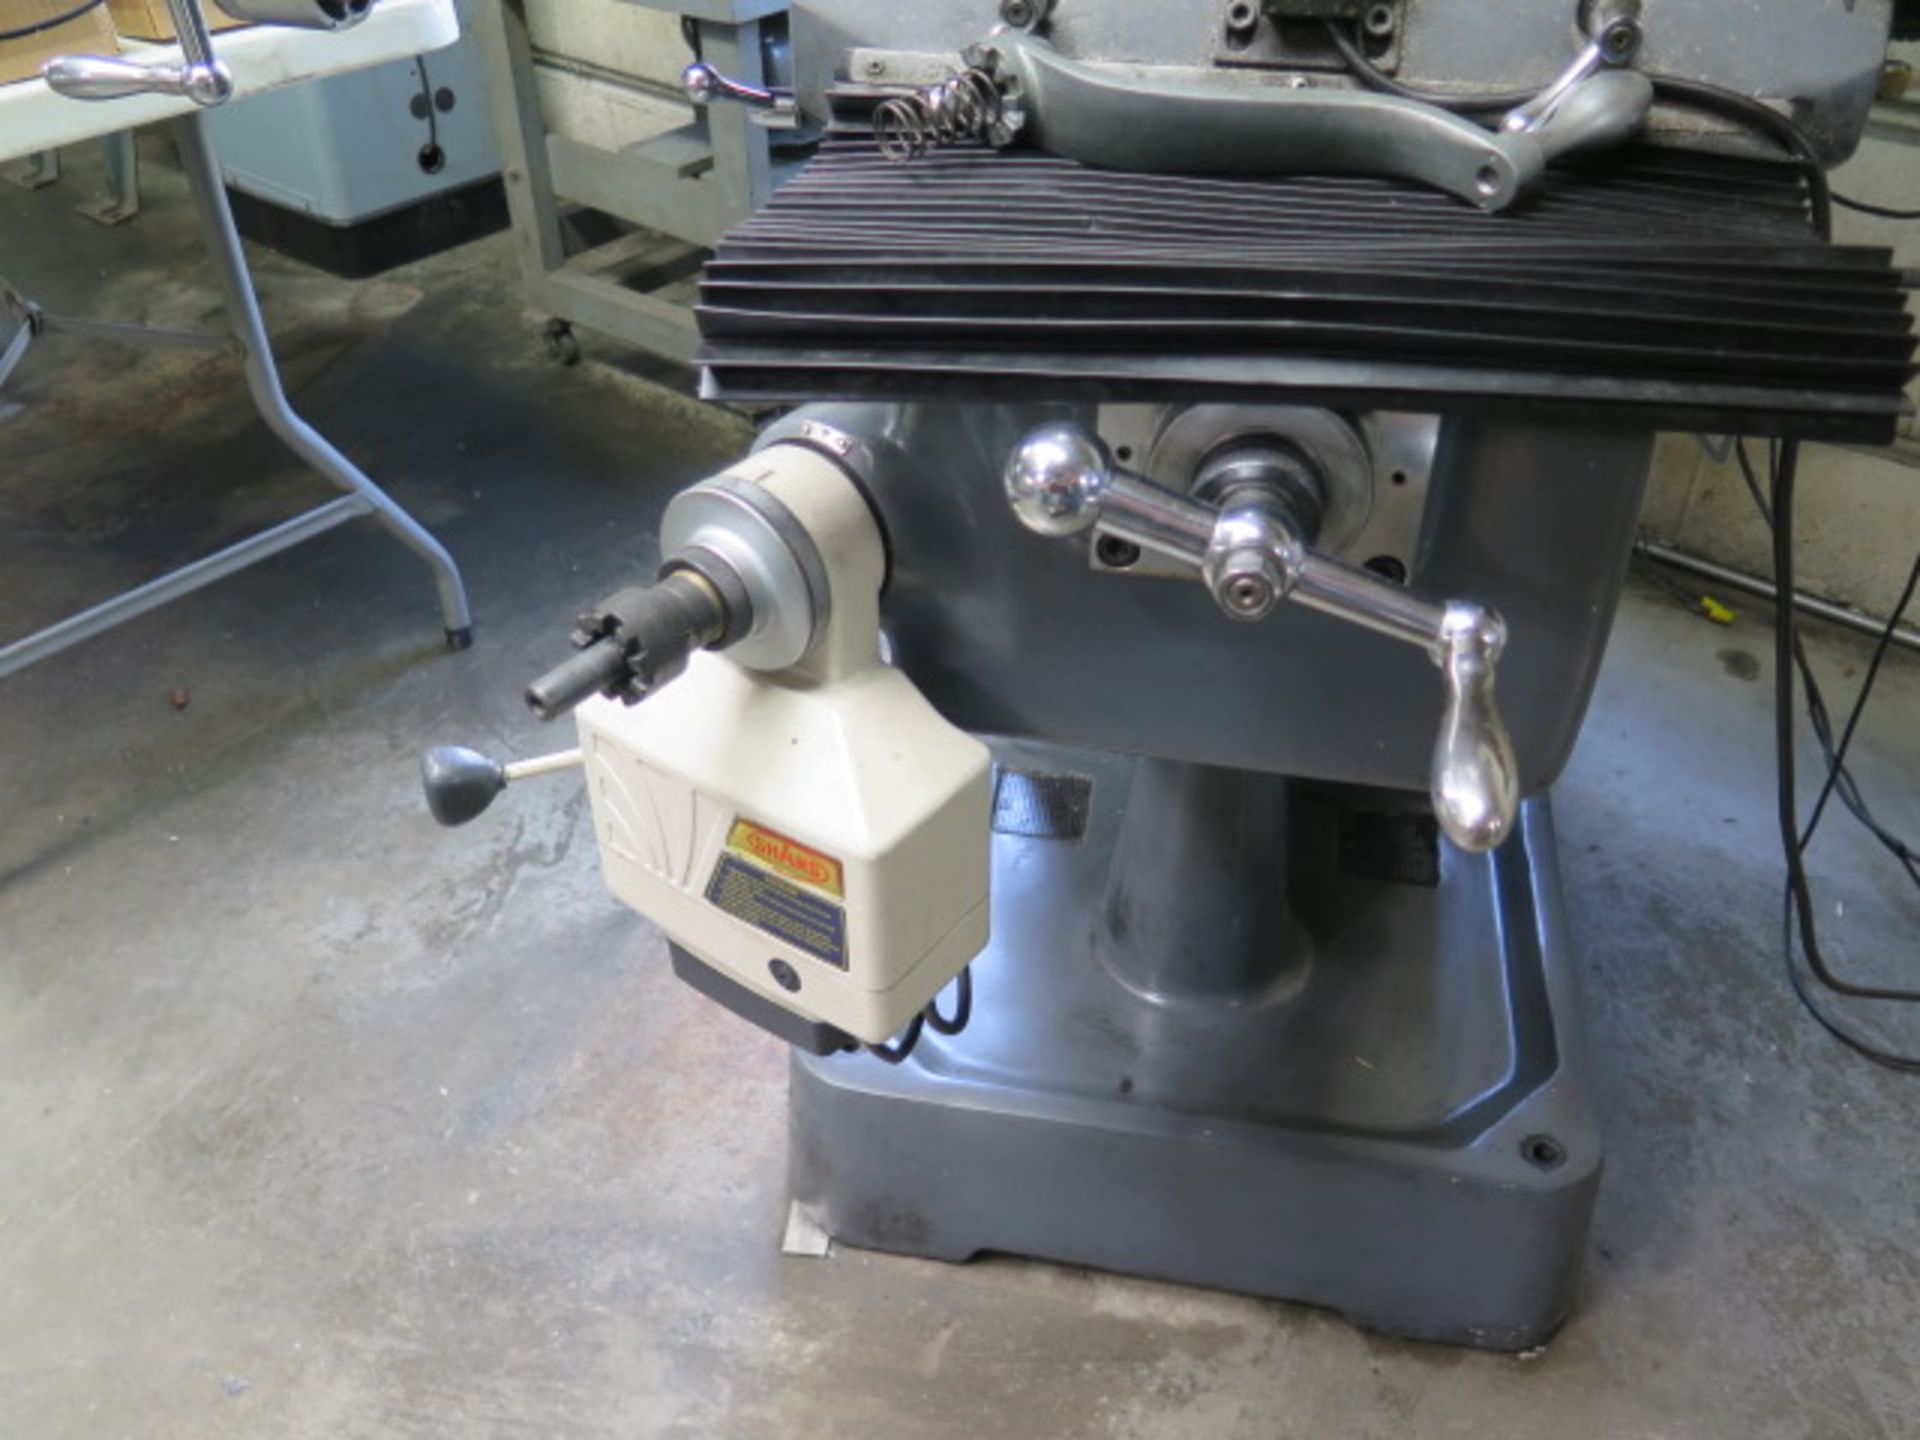 Import Vertical Mill s/n F050909 w/ Contour SDS2MS Prog DRO, 3Hp Motor, 60-4200 Dial, SOLD AS IS - Image 9 of 12